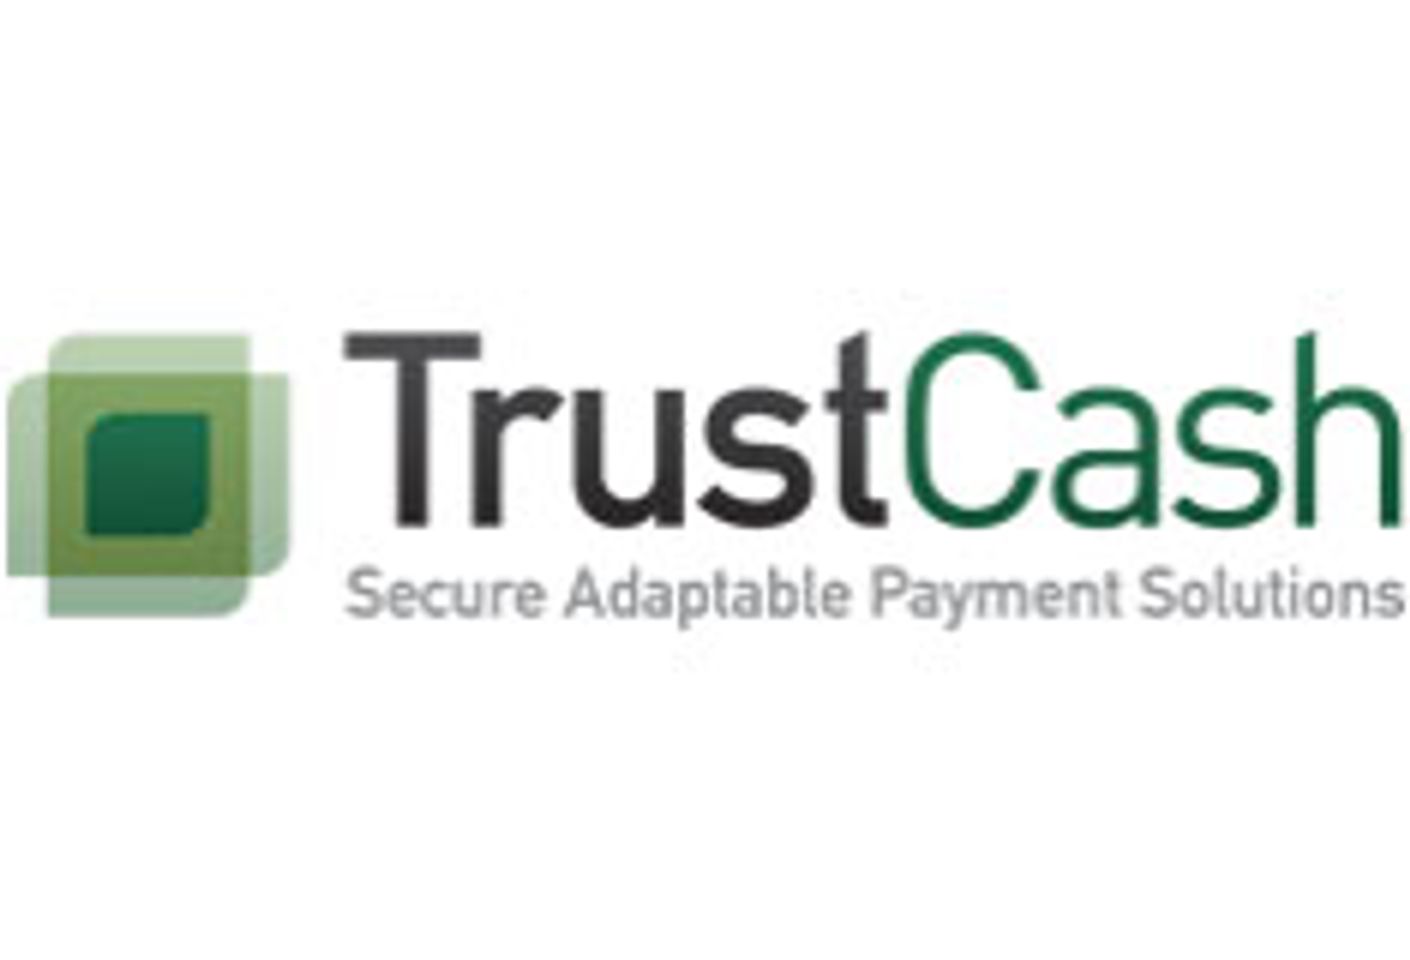 Trustcash Now 'Shopping Cart' Compatible